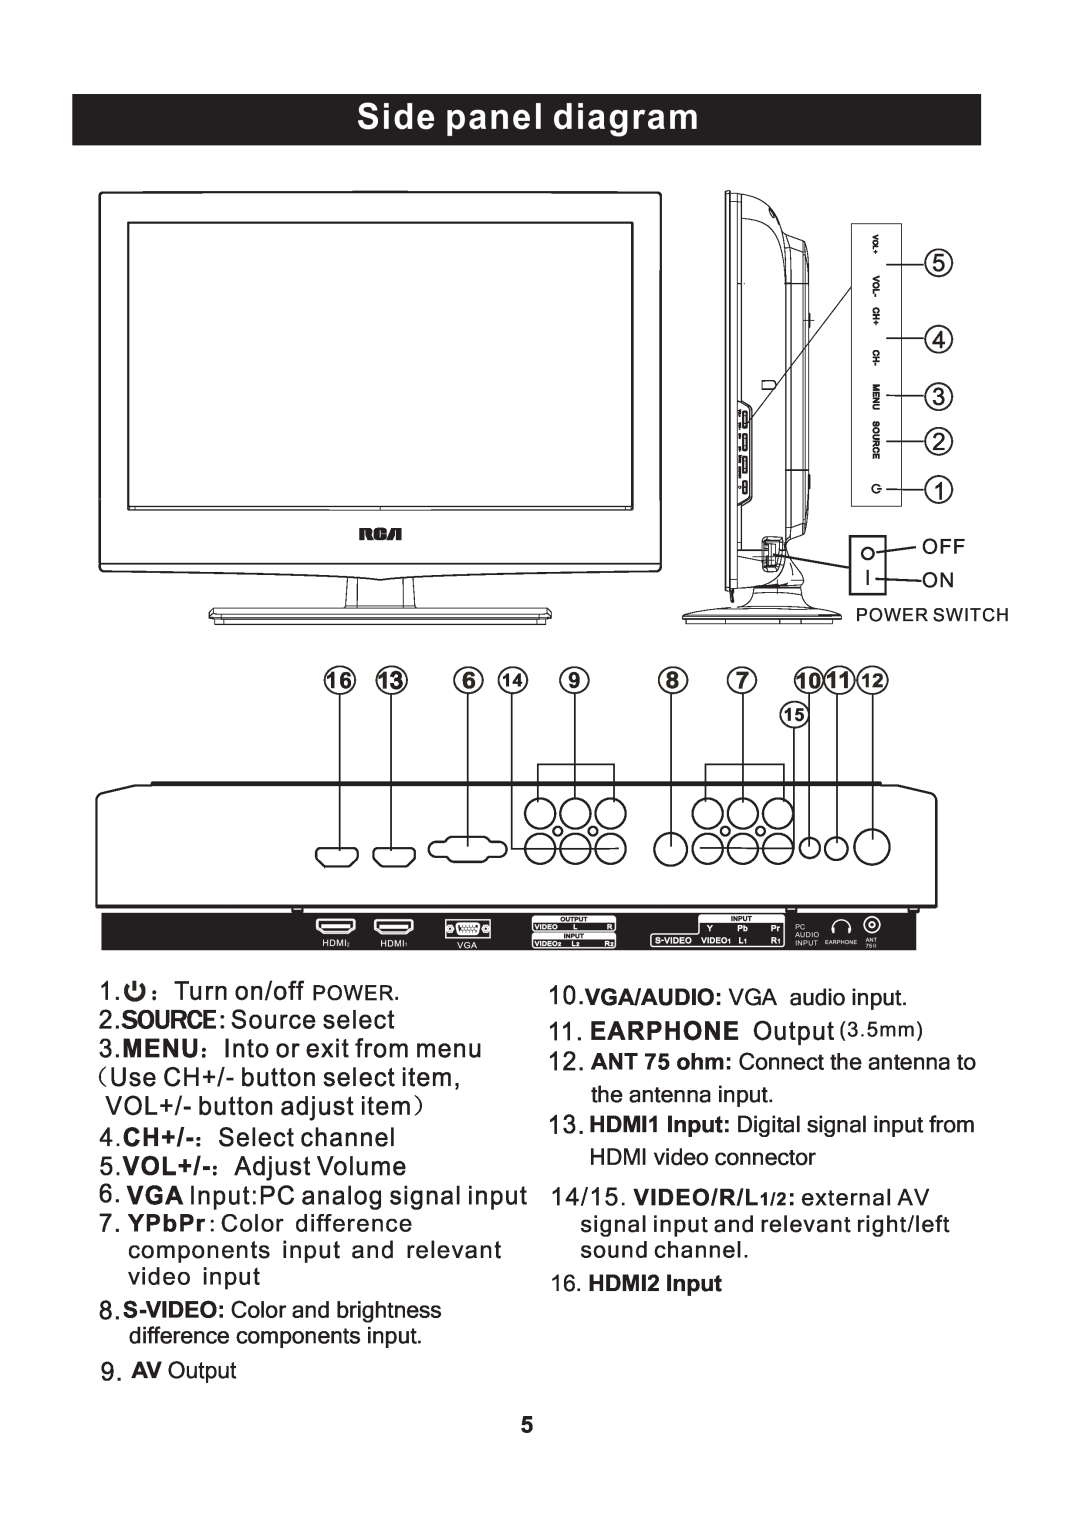 RCA RLC2609 Side panel diagram, YPbPrColor difference components input and relevant video input, HDMI2 Input, AV Output 